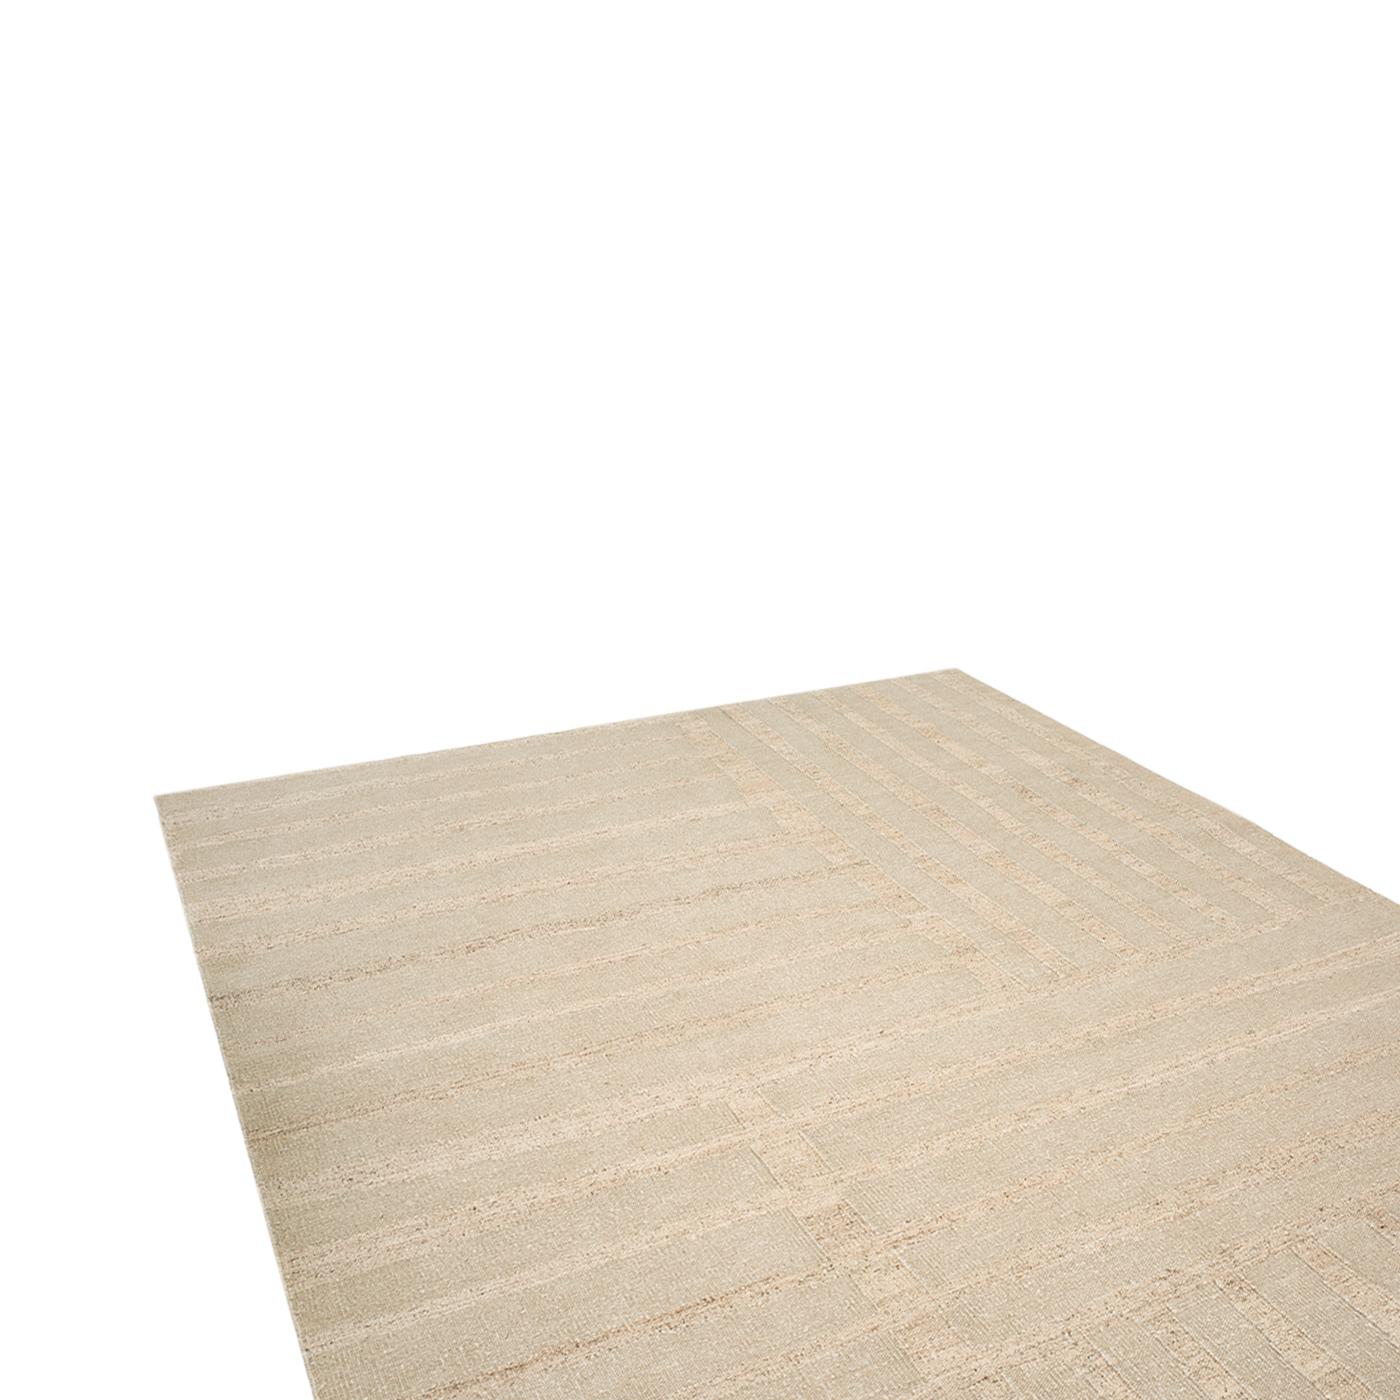 COLOUR: Natural
MATERIAL: 50% Linen, 50% Nettle
QUALITY: Flatweave
ORIGIN: Handwoven rug produced in Nepal
 
RUG SIZE DISPLAYED: 200cm x 300cm

Part of the Knots Rugs Textures collection, Linen Nettle Stripe plays with tonal shades and linear